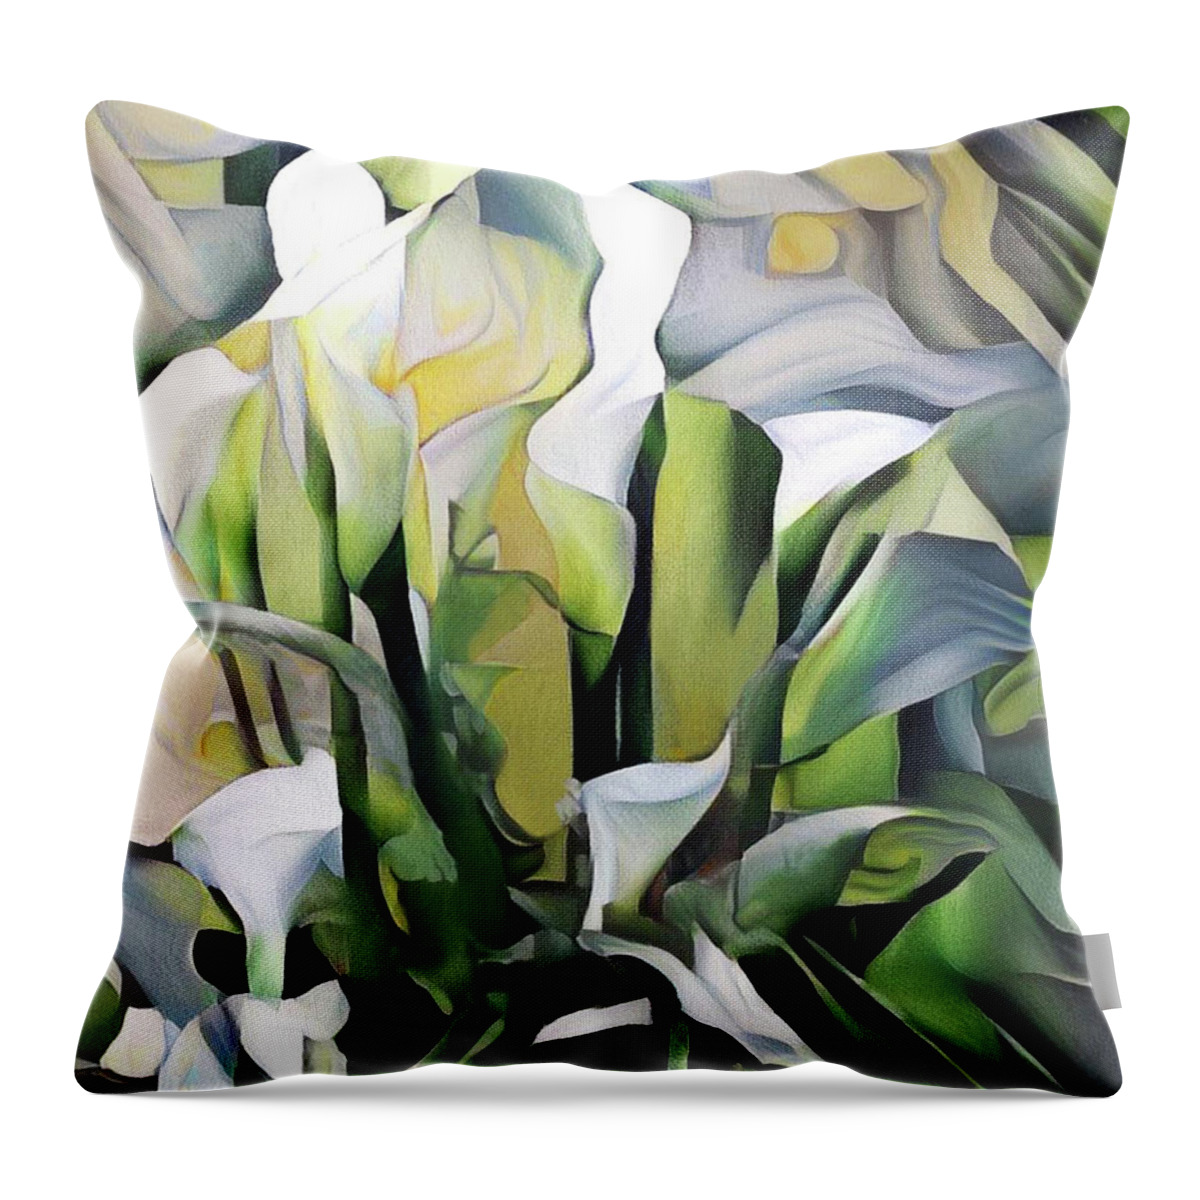 Calla Lilies Throw Pillow featuring the digital art Calla Lilies Abstract by Peggy Collins